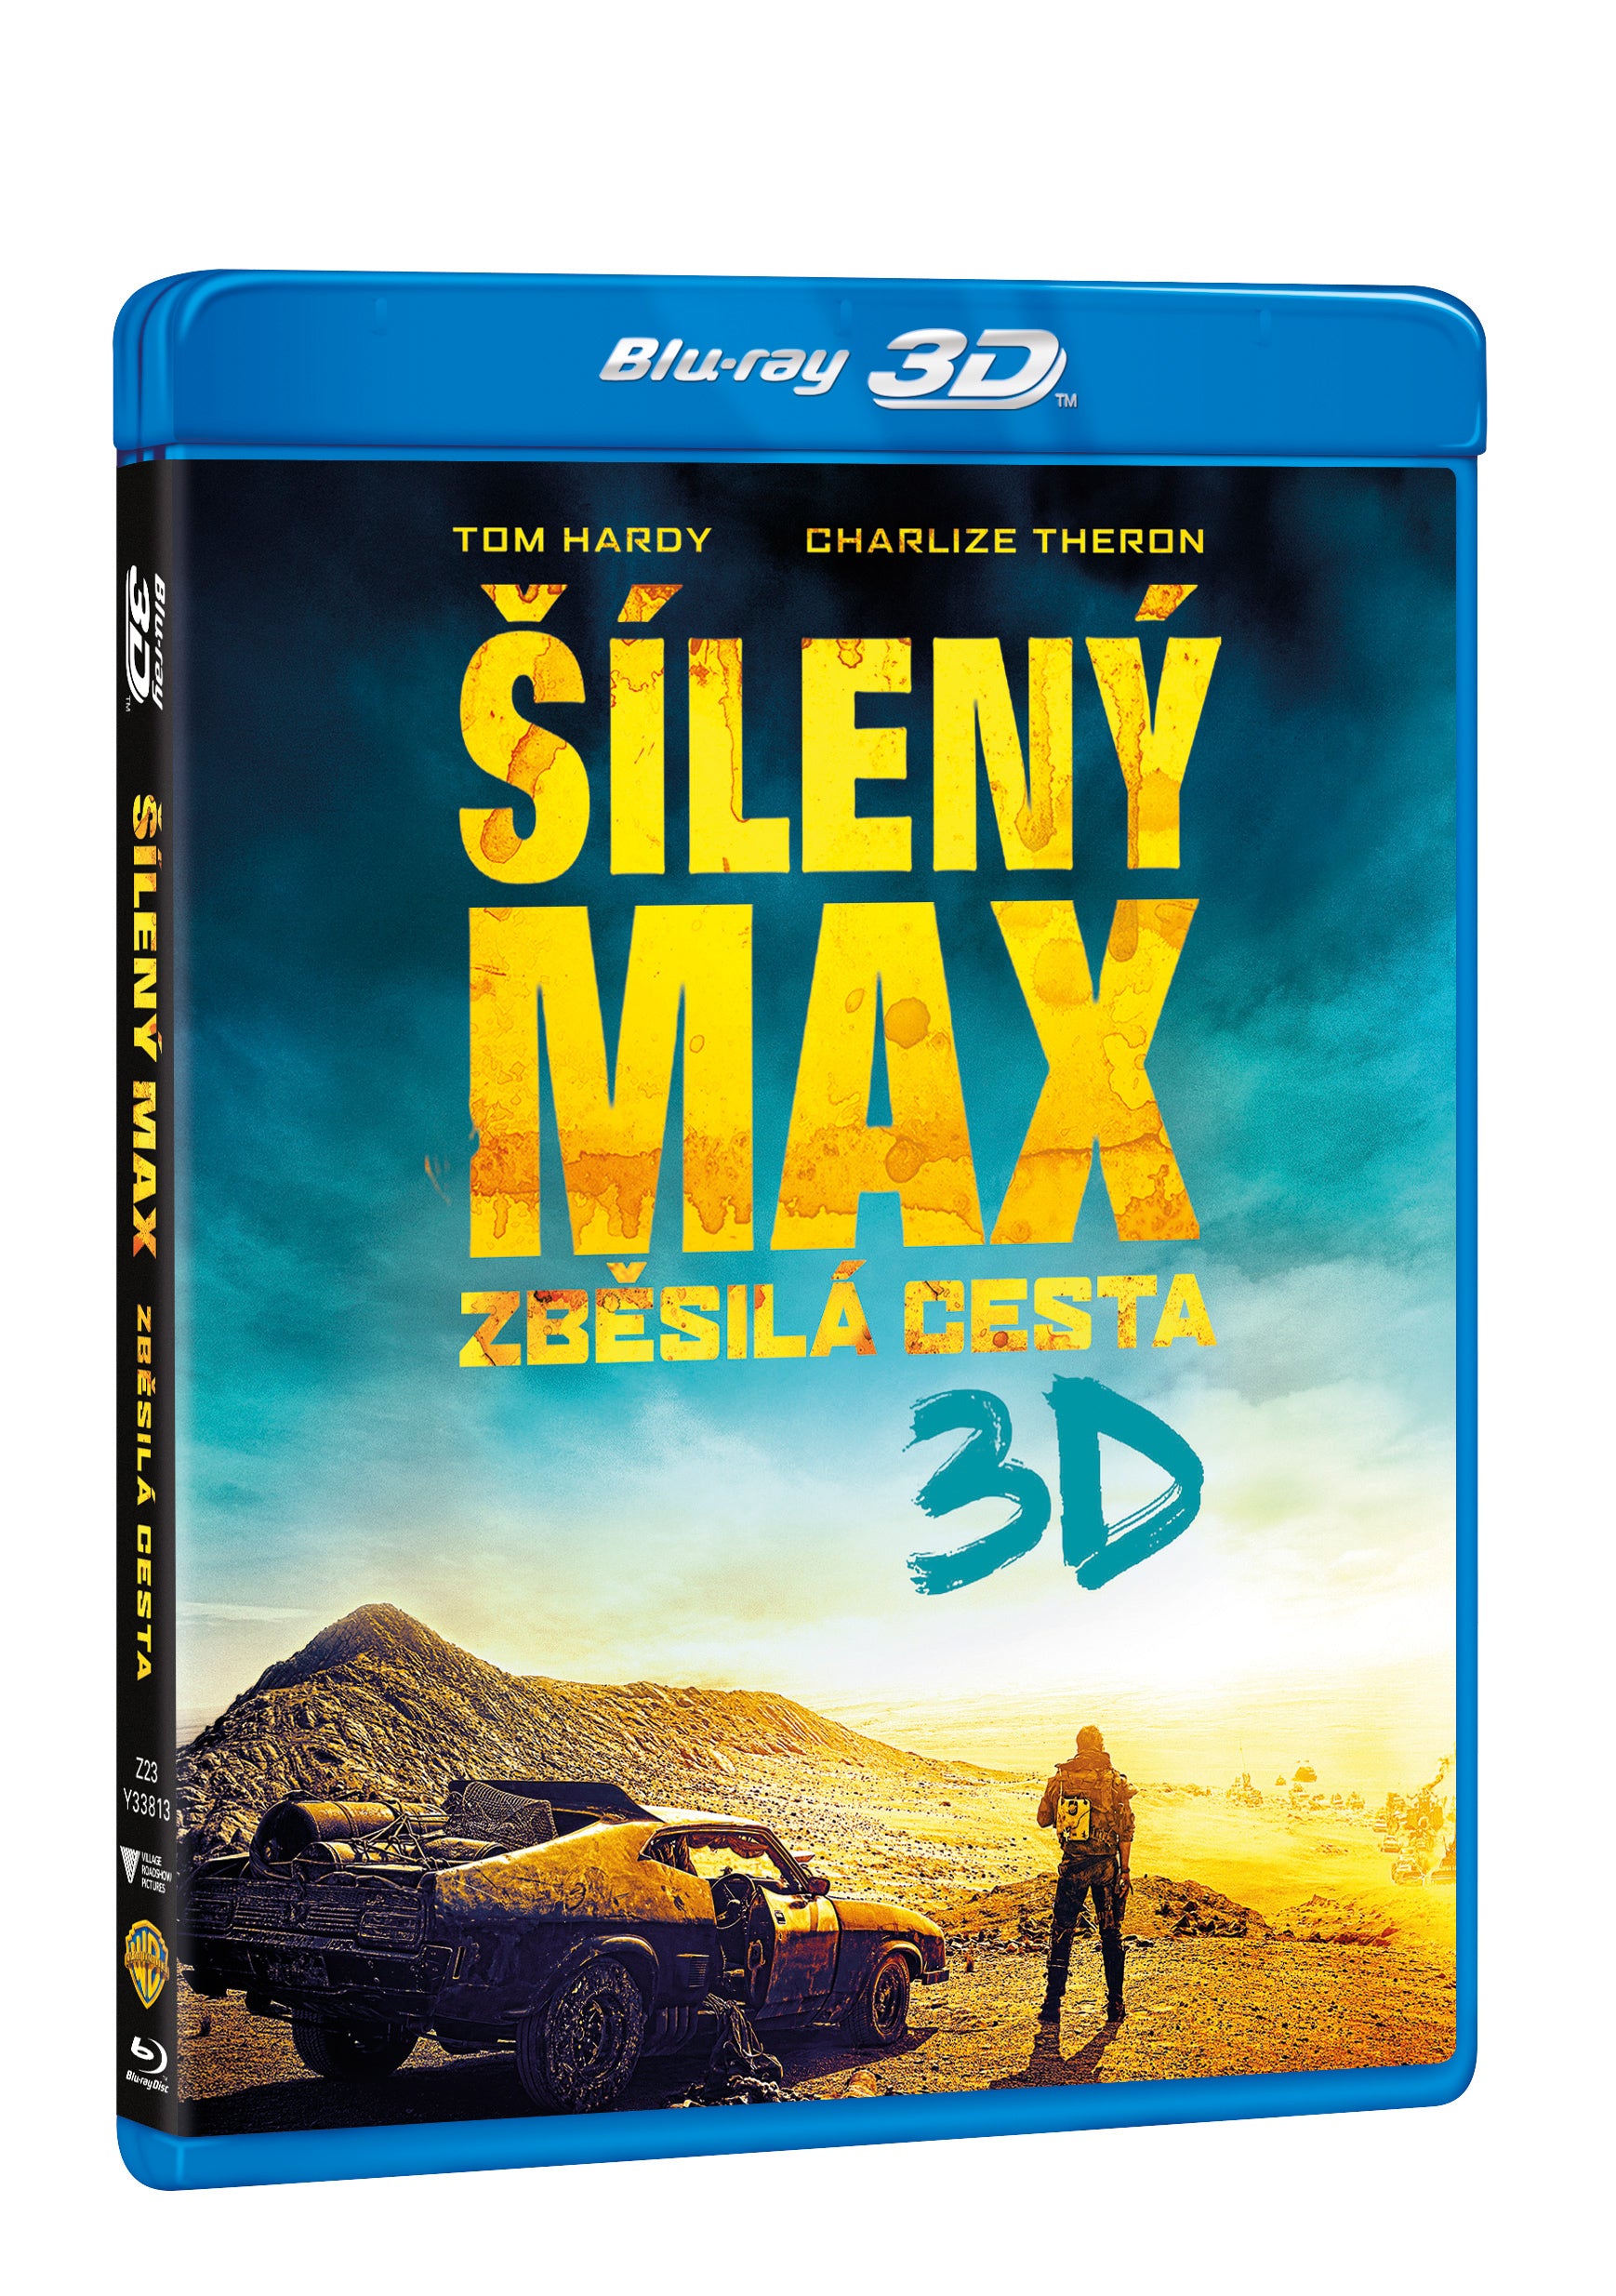 Sileny Max: Zbesila cesta 2BD (3D+2D) / Mad Max: Fury Road - Czech version